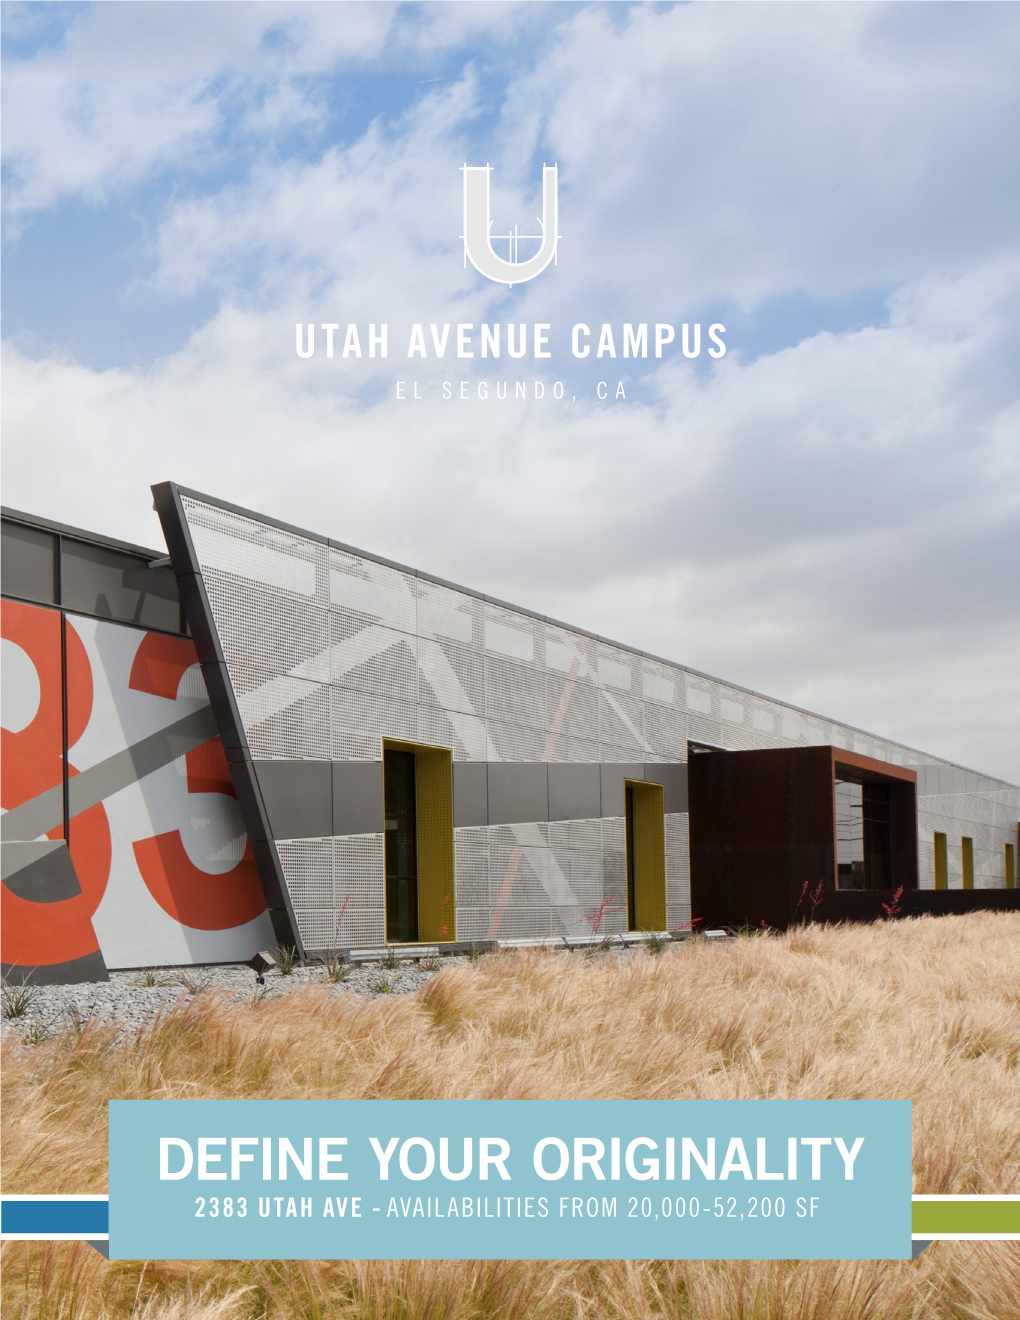 Define Your Originality 2383 Utah Ave - Availabilities from 20,000-52,200 Sf